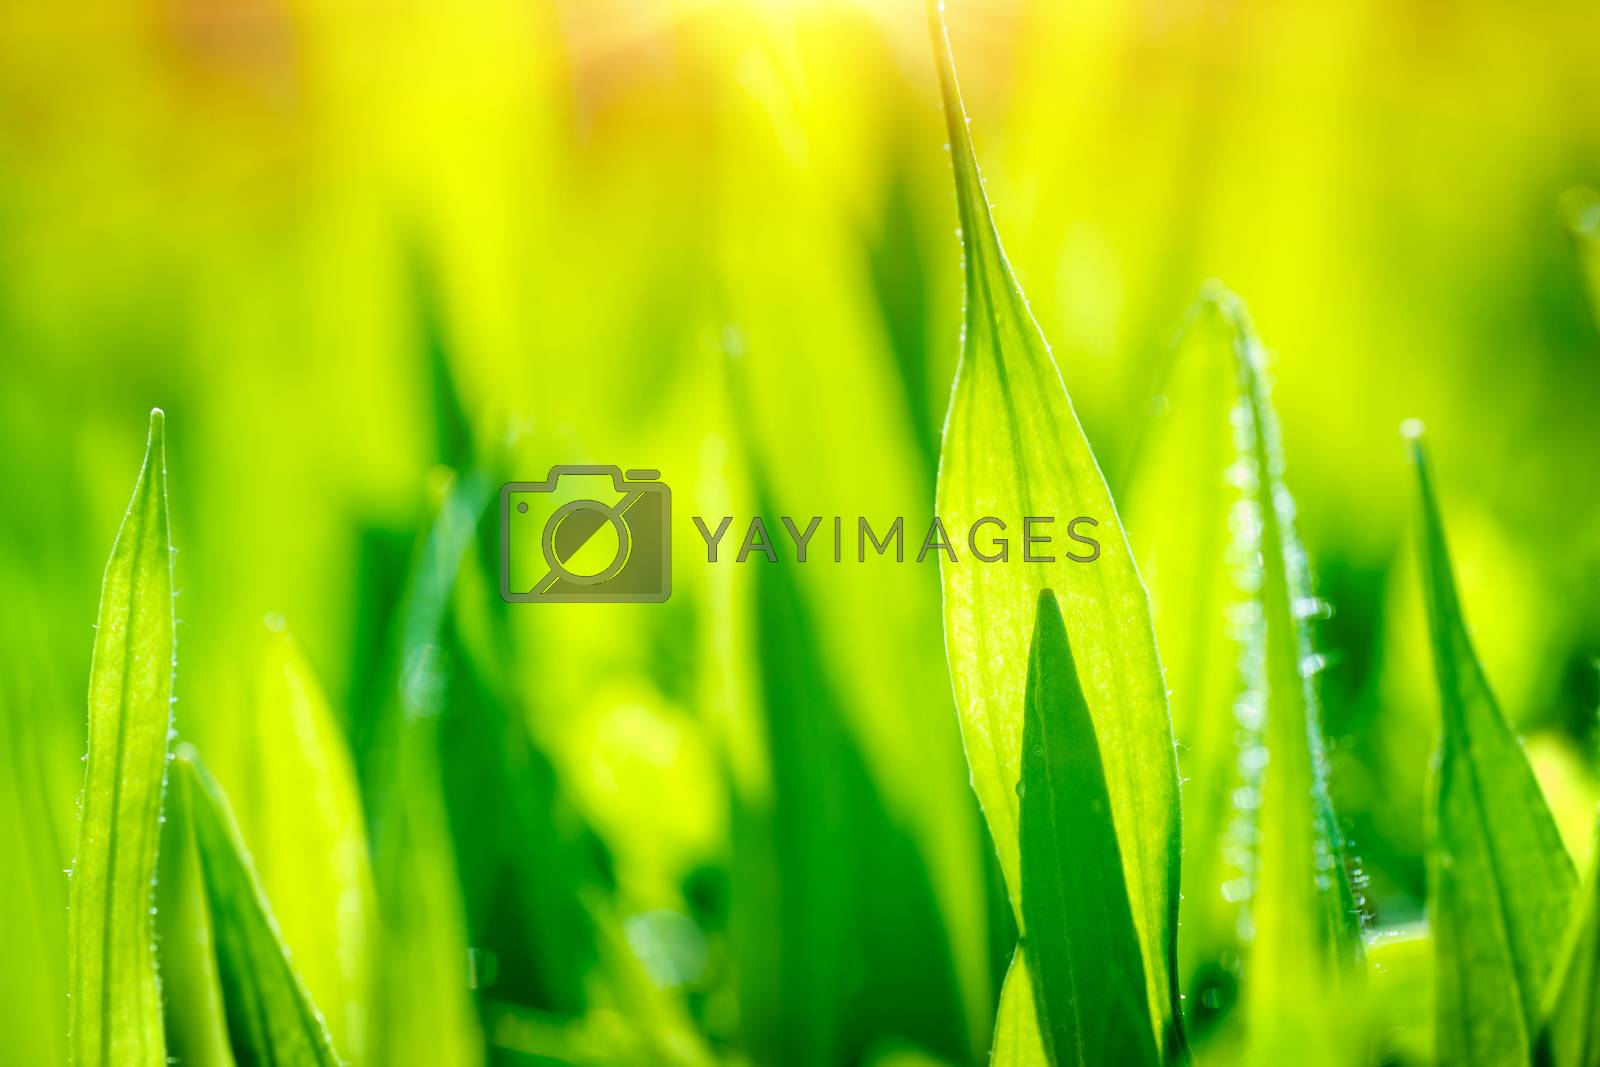 Royalty free image of Fresh green grass background by Anna_Omelchenko